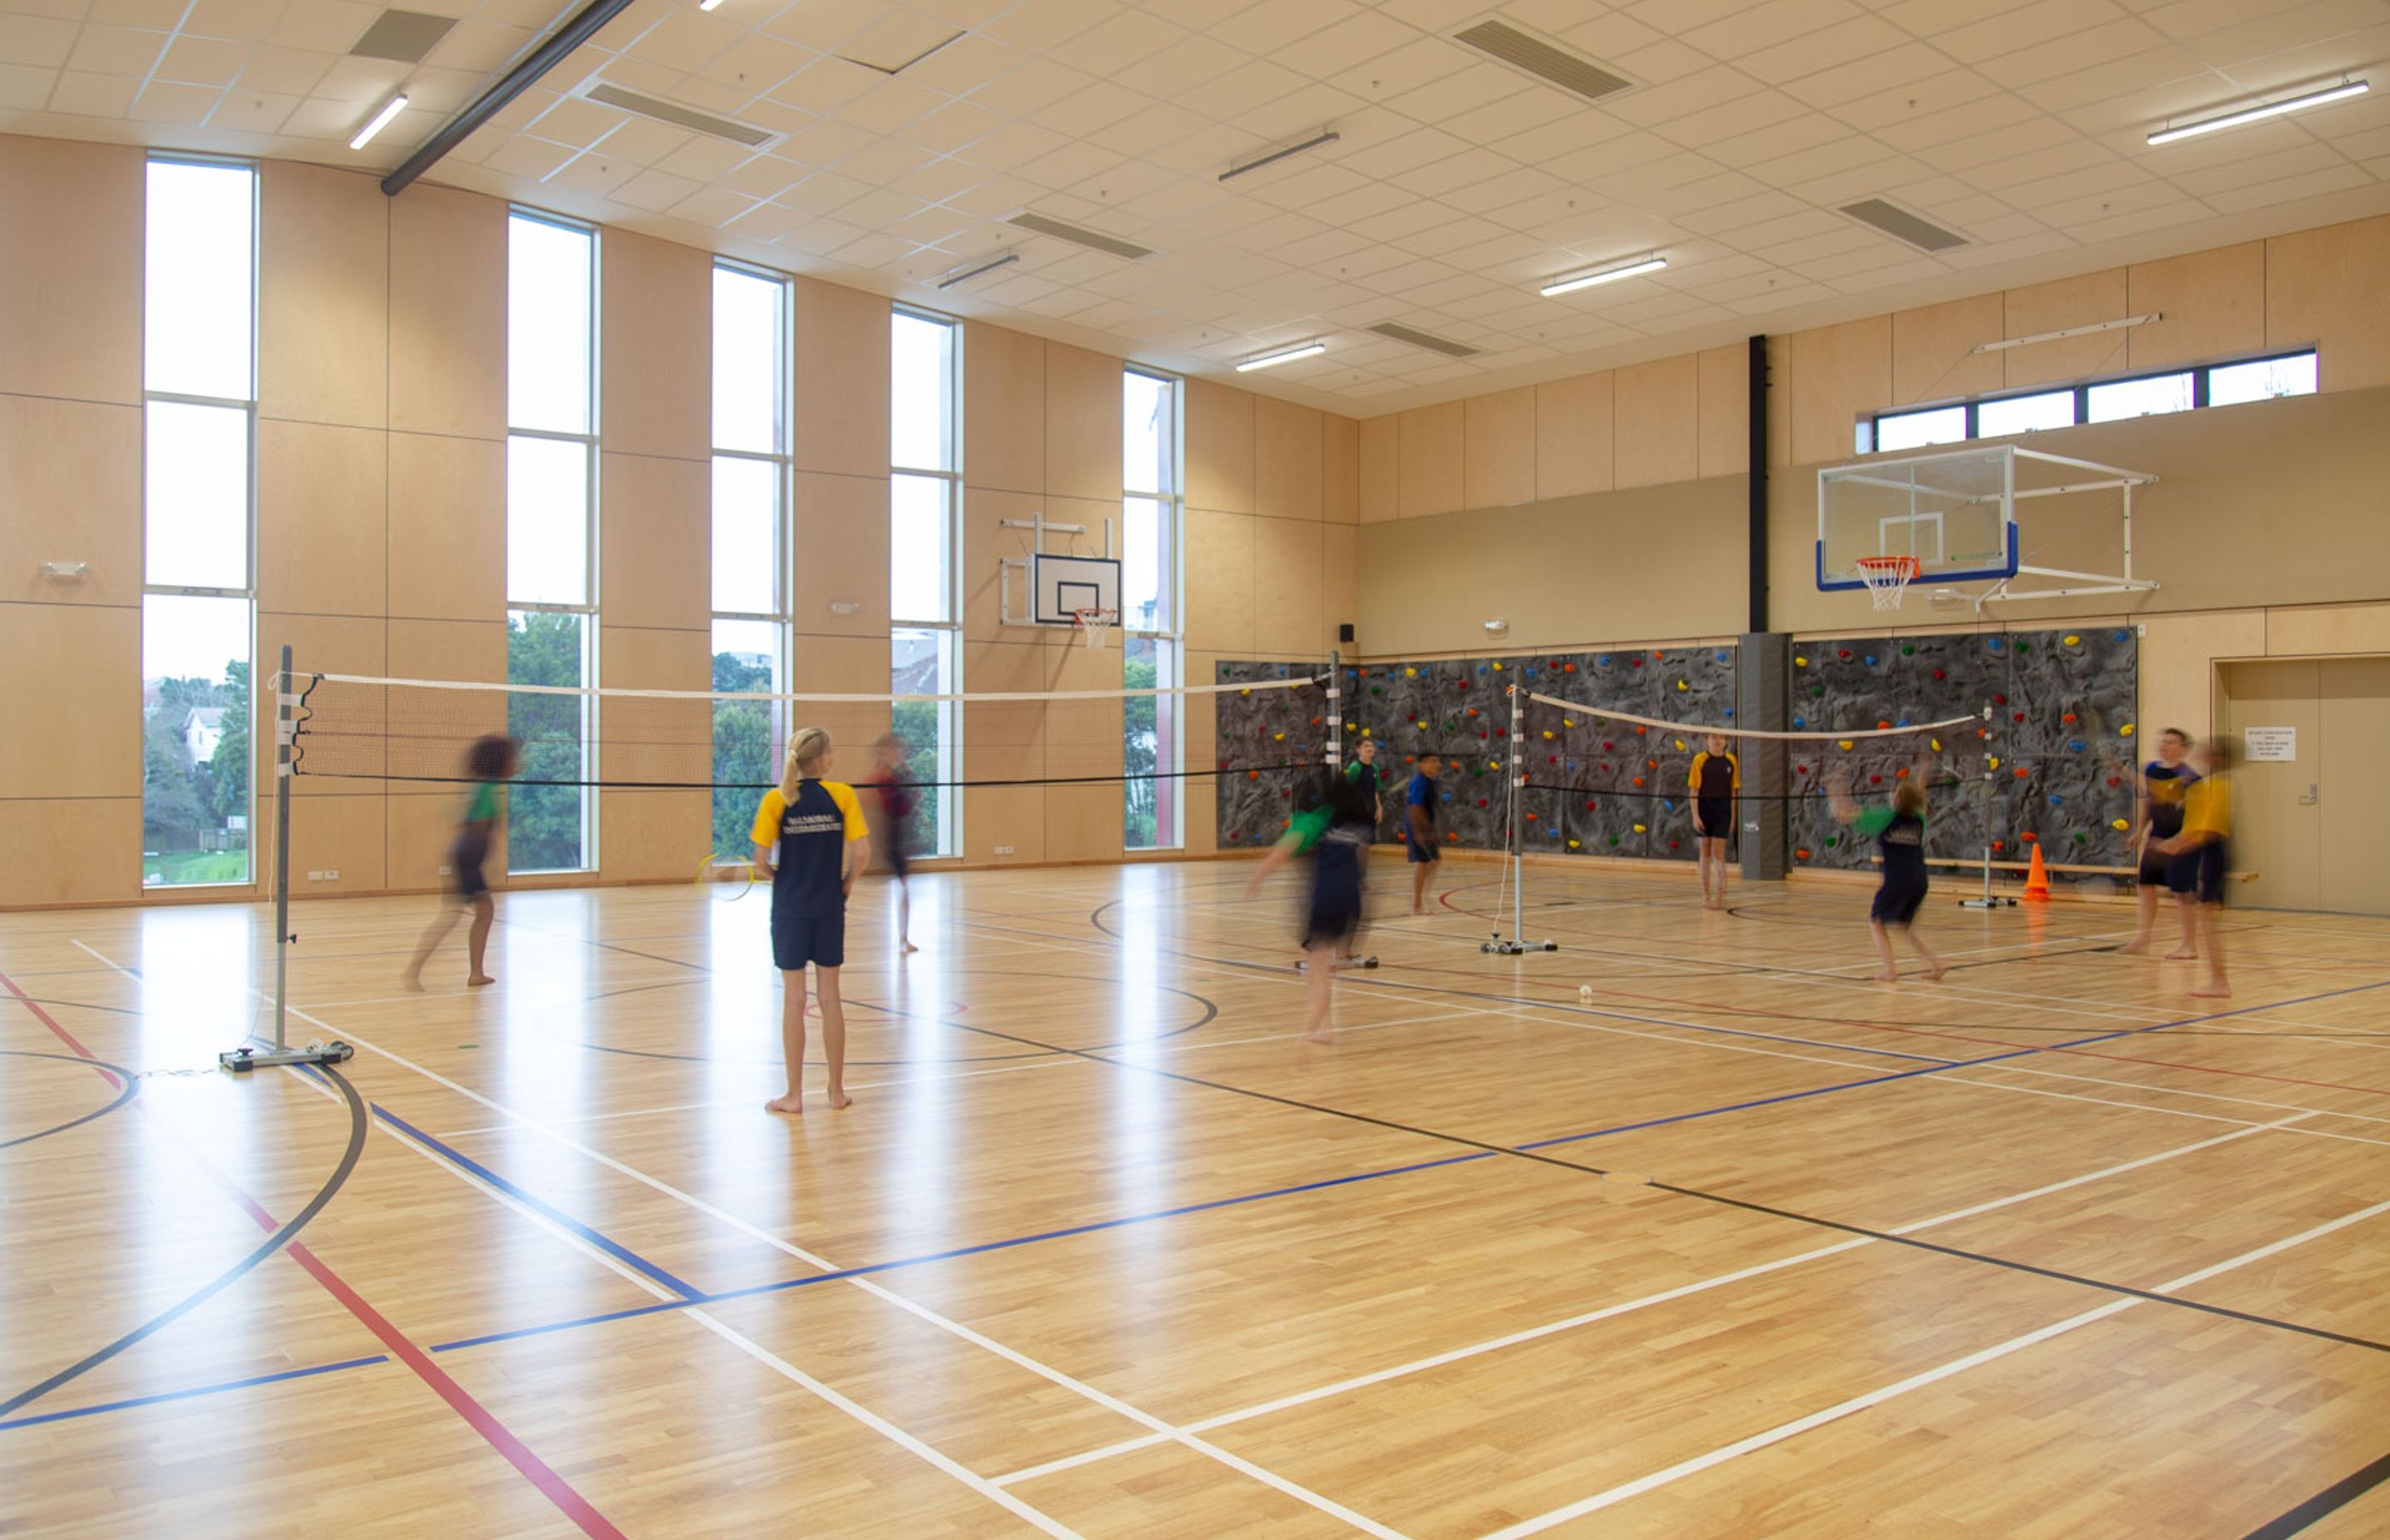 Plytech Green products utilise bio-based, renewable lignin glues as a replacement for traditional fossil phenol glues for a healthier, more sustainable plywood product, as seen here in the Balmoral School gymnasium by RTA Studio.